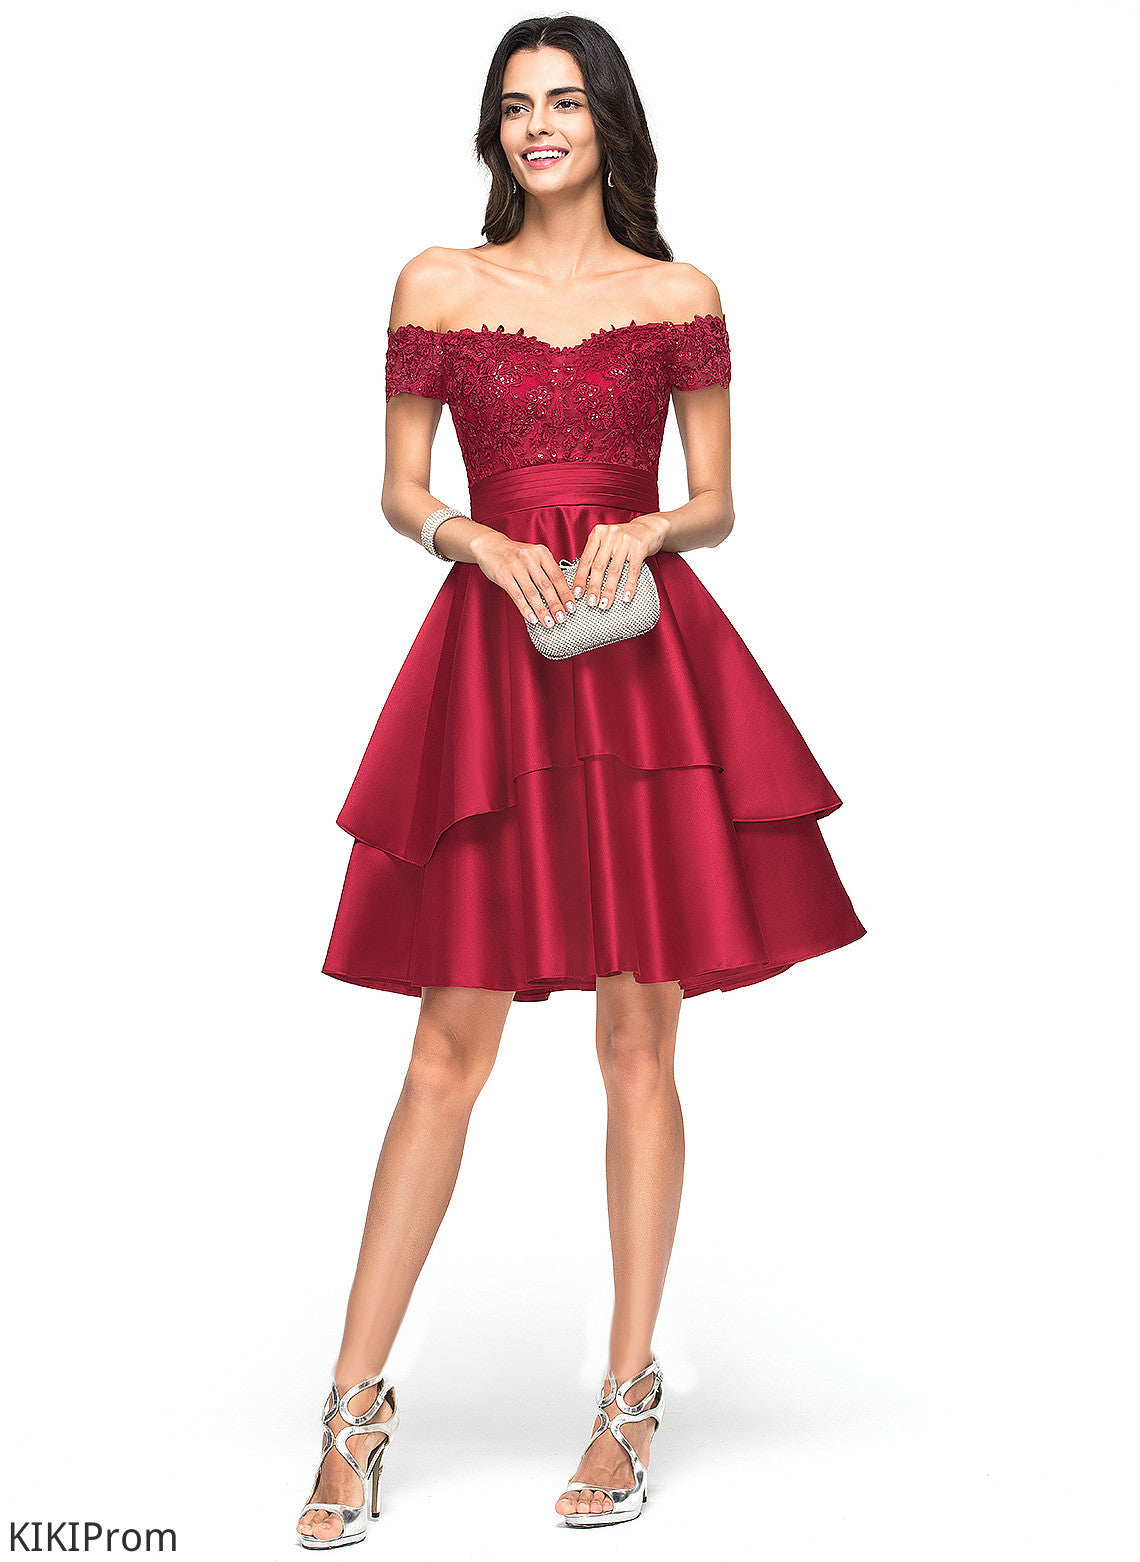 A-Line Amber Sequins Satin Homecoming With Lace Homecoming Dresses Off-the-Shoulder Knee-Length Dress